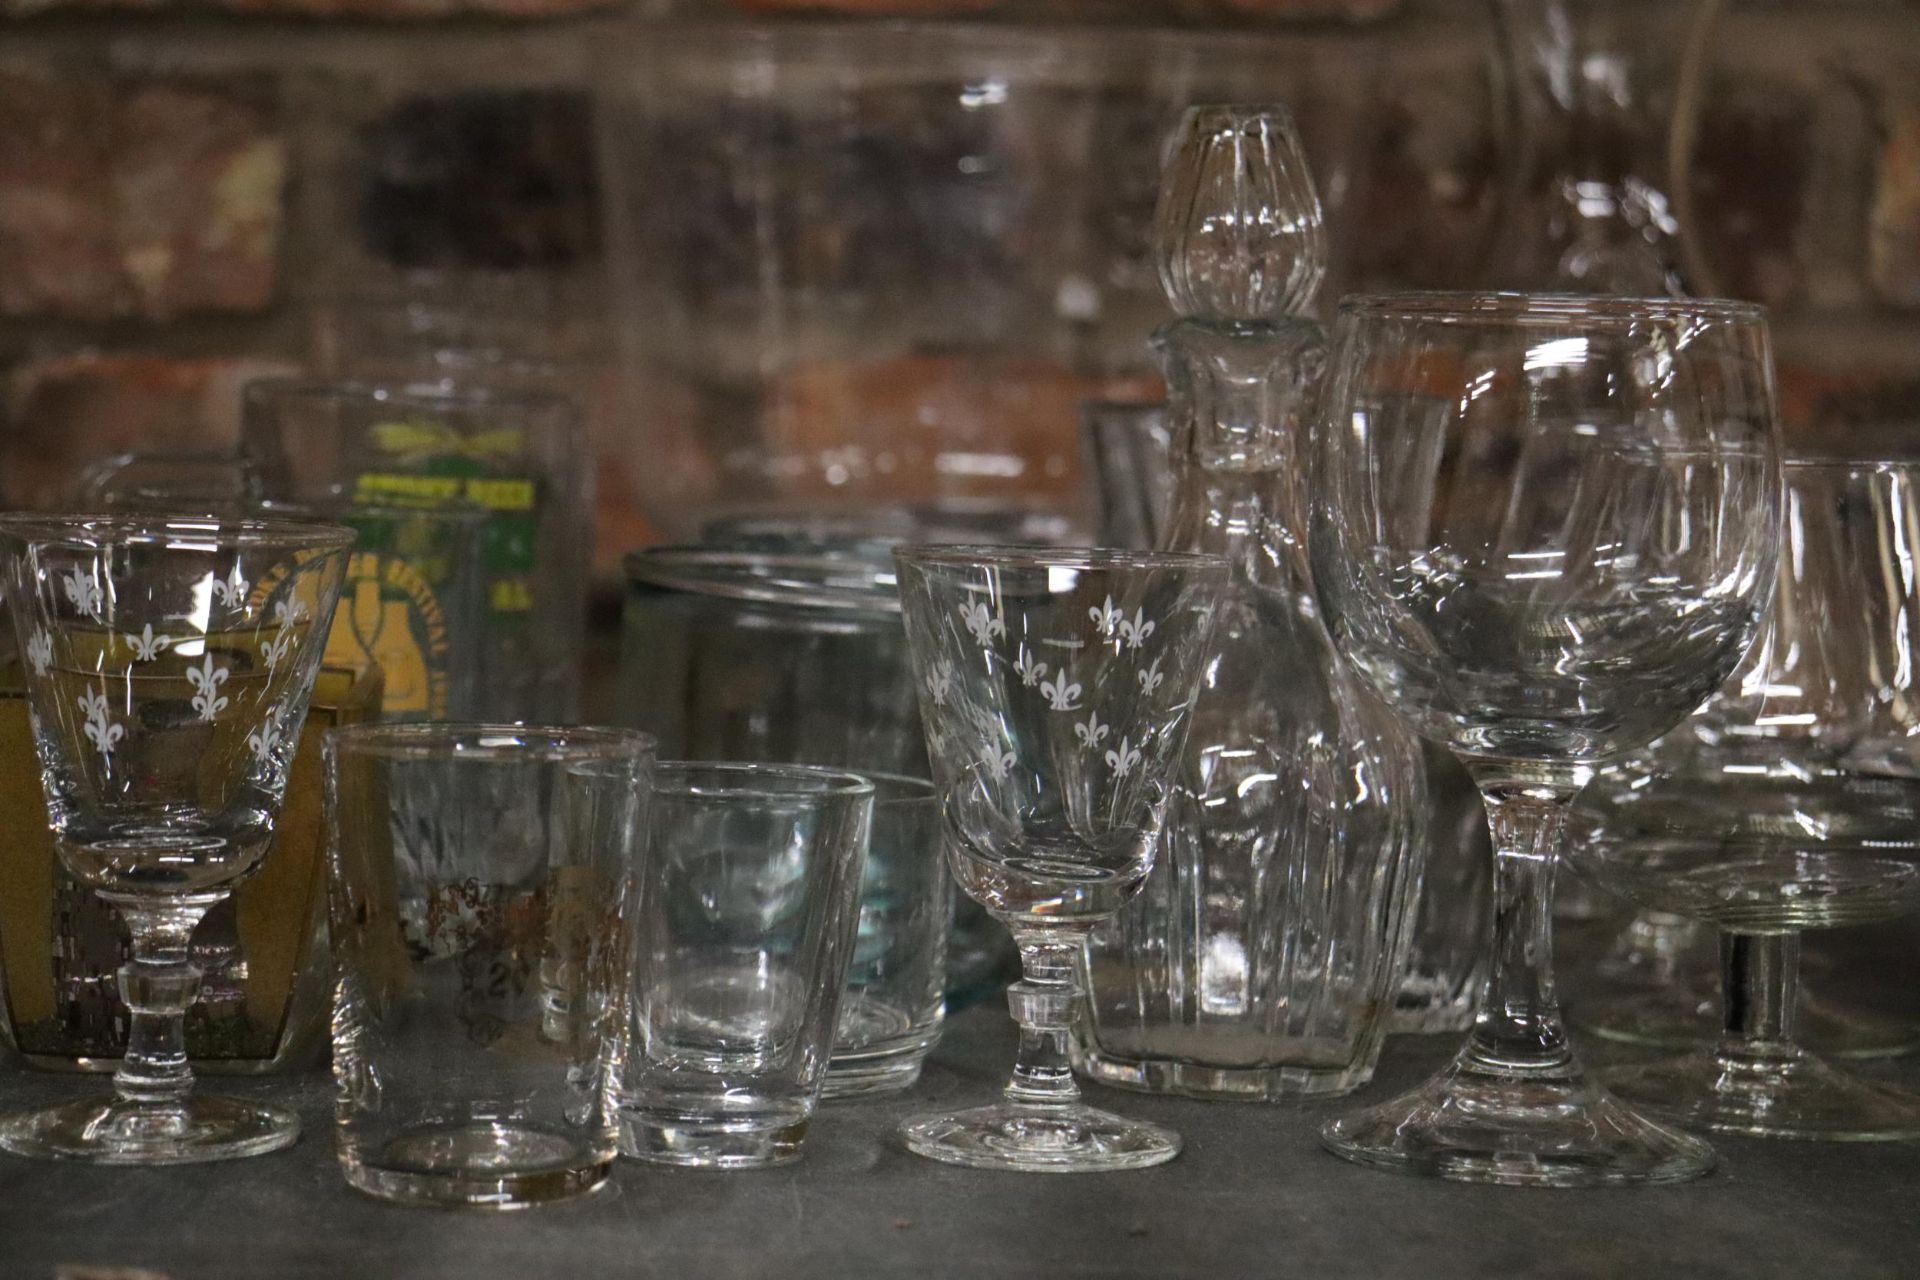 A QUANTITY OF GLASSWARE TO INCLUDE A LARGE FOOTED BOWL, GLASSES, TANKARDS, TUMBLERS, ETC - Image 3 of 12